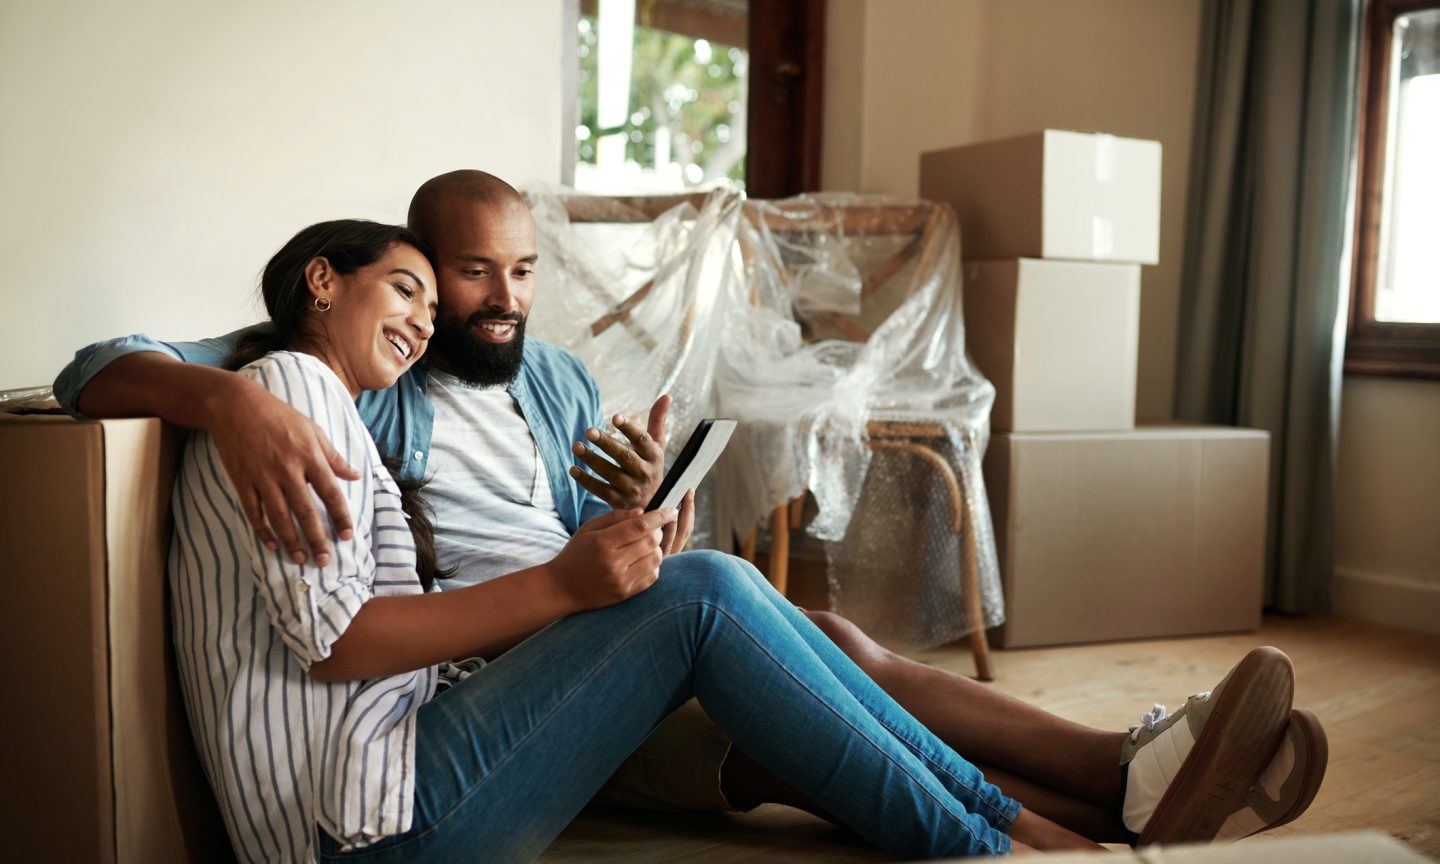 New FHFA Credit score Rating Guidelines May Broaden Homeownership Entry – NerdWallet